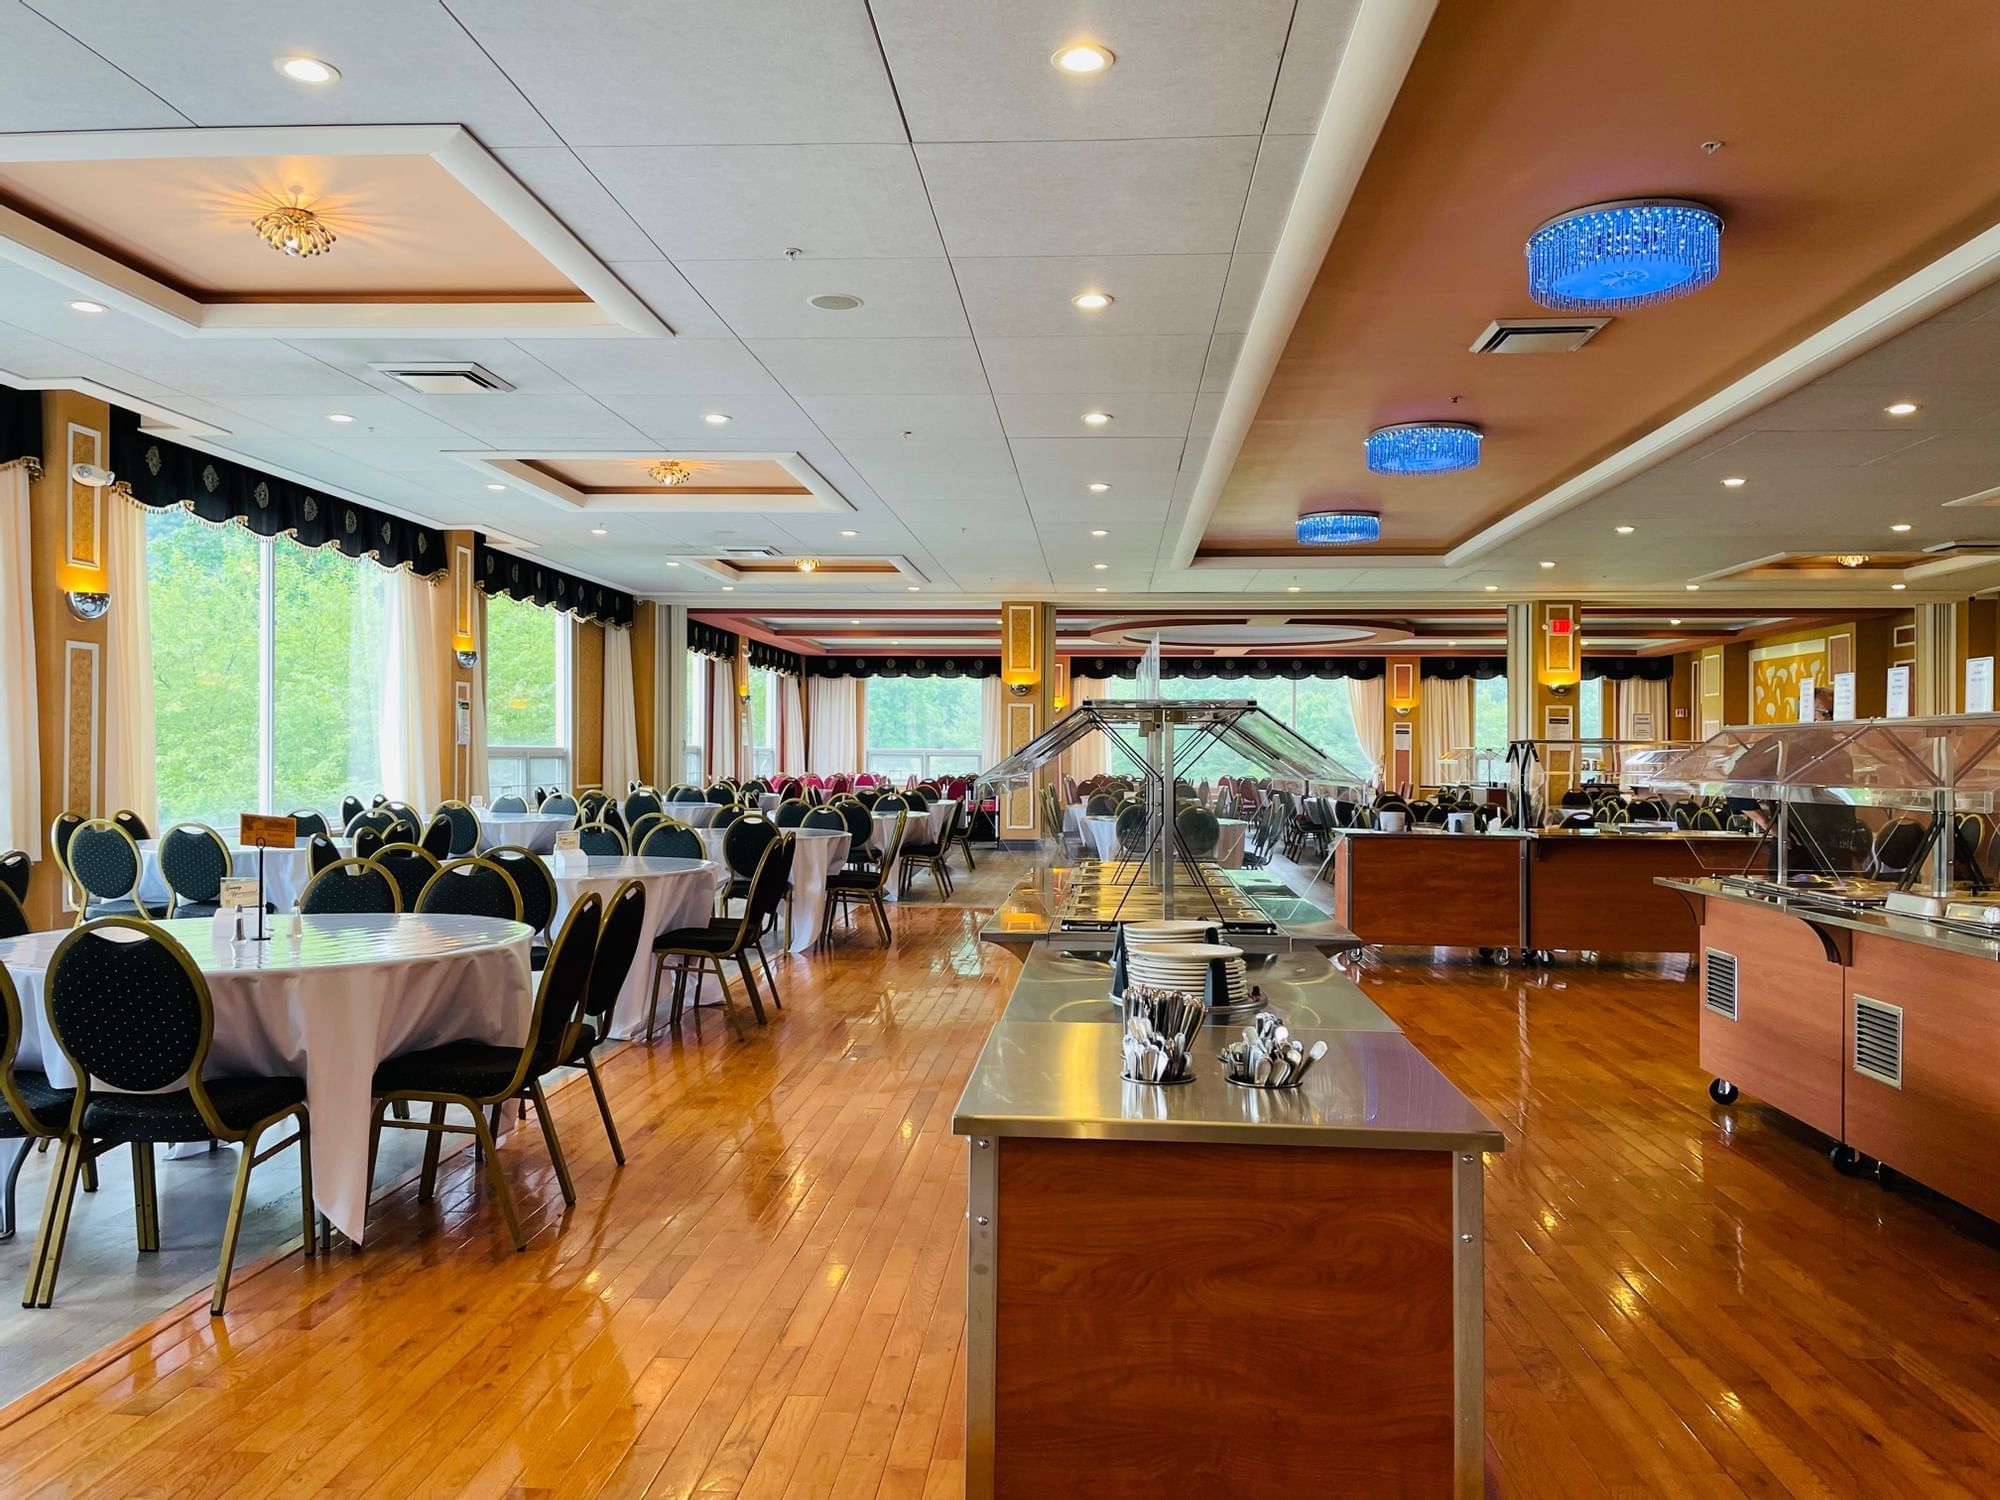 Interior view of a restaurant dining hall at Honor’s Haven